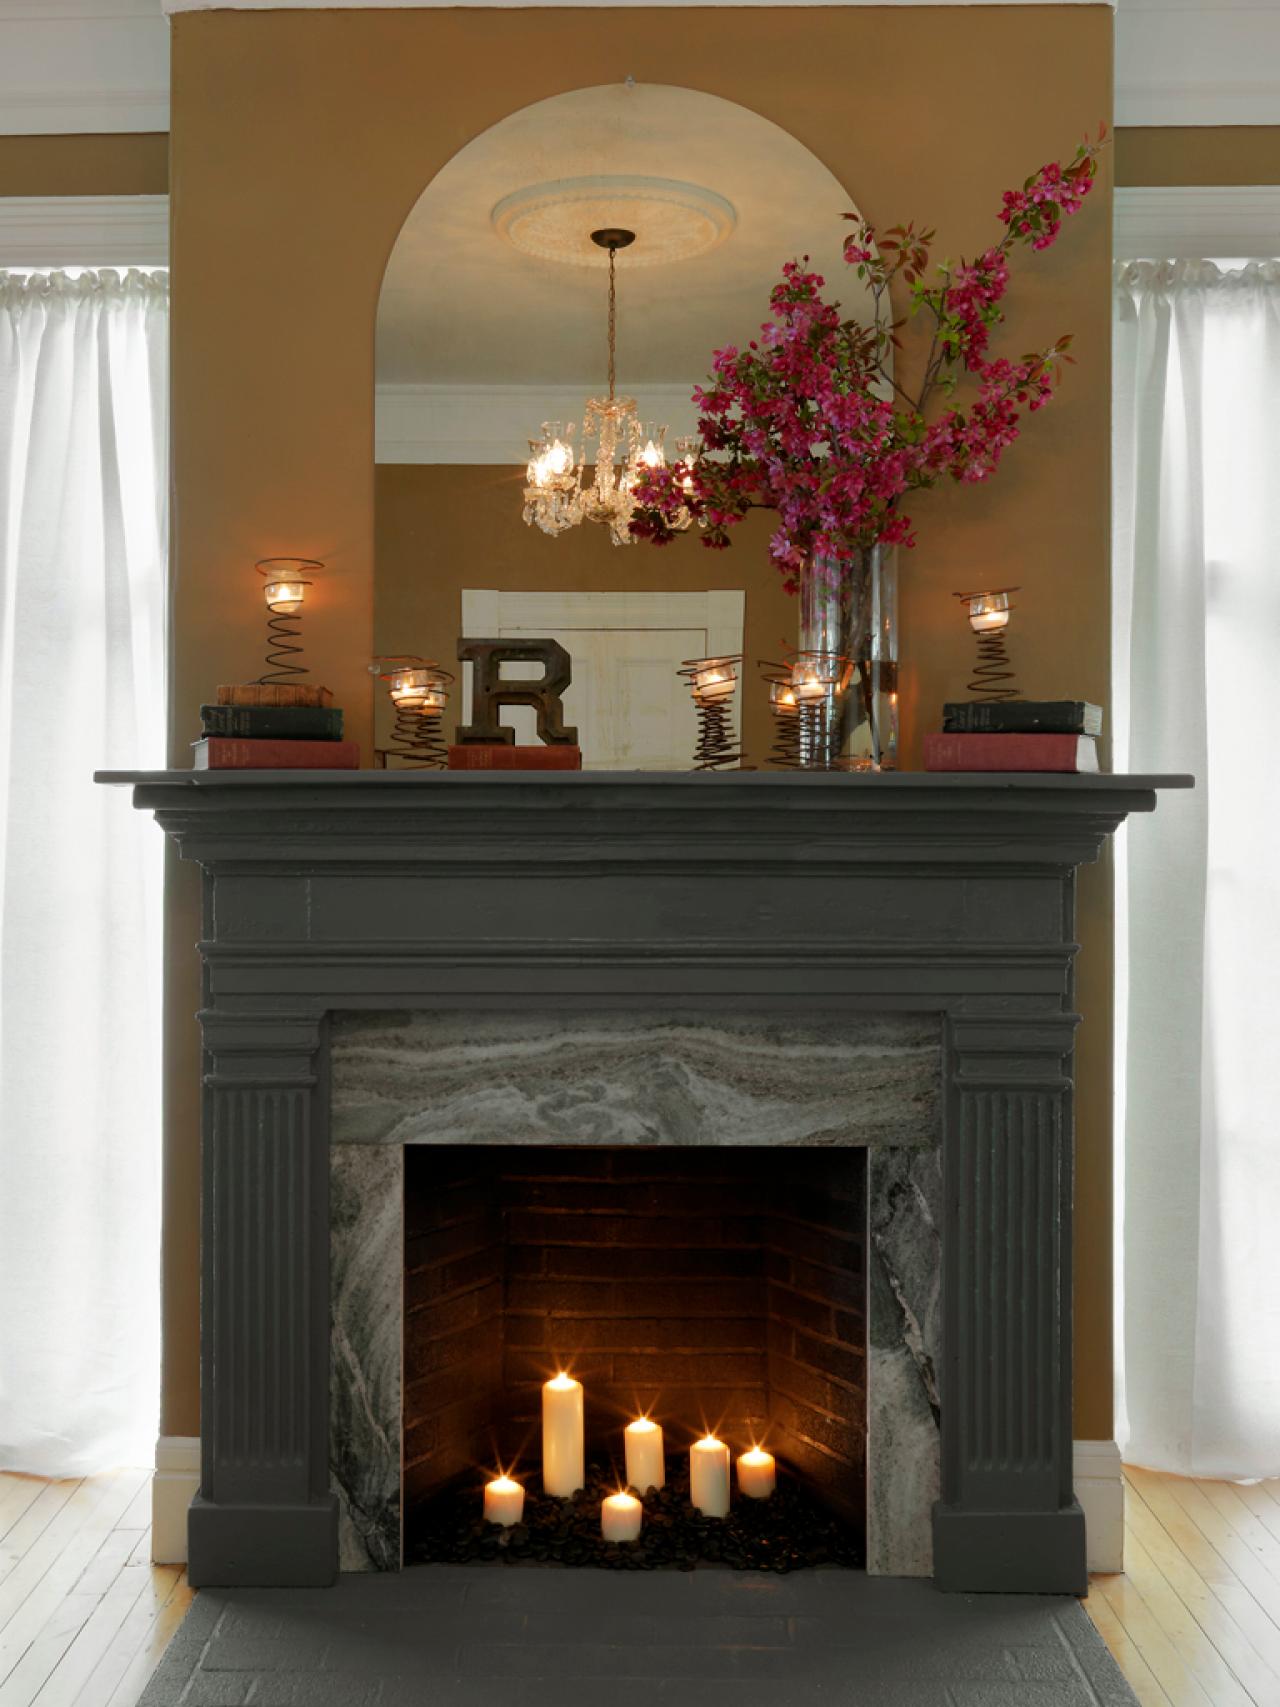 Fireplace Surround And Make A Mantel, How To Remove A Wooden Fire Surround